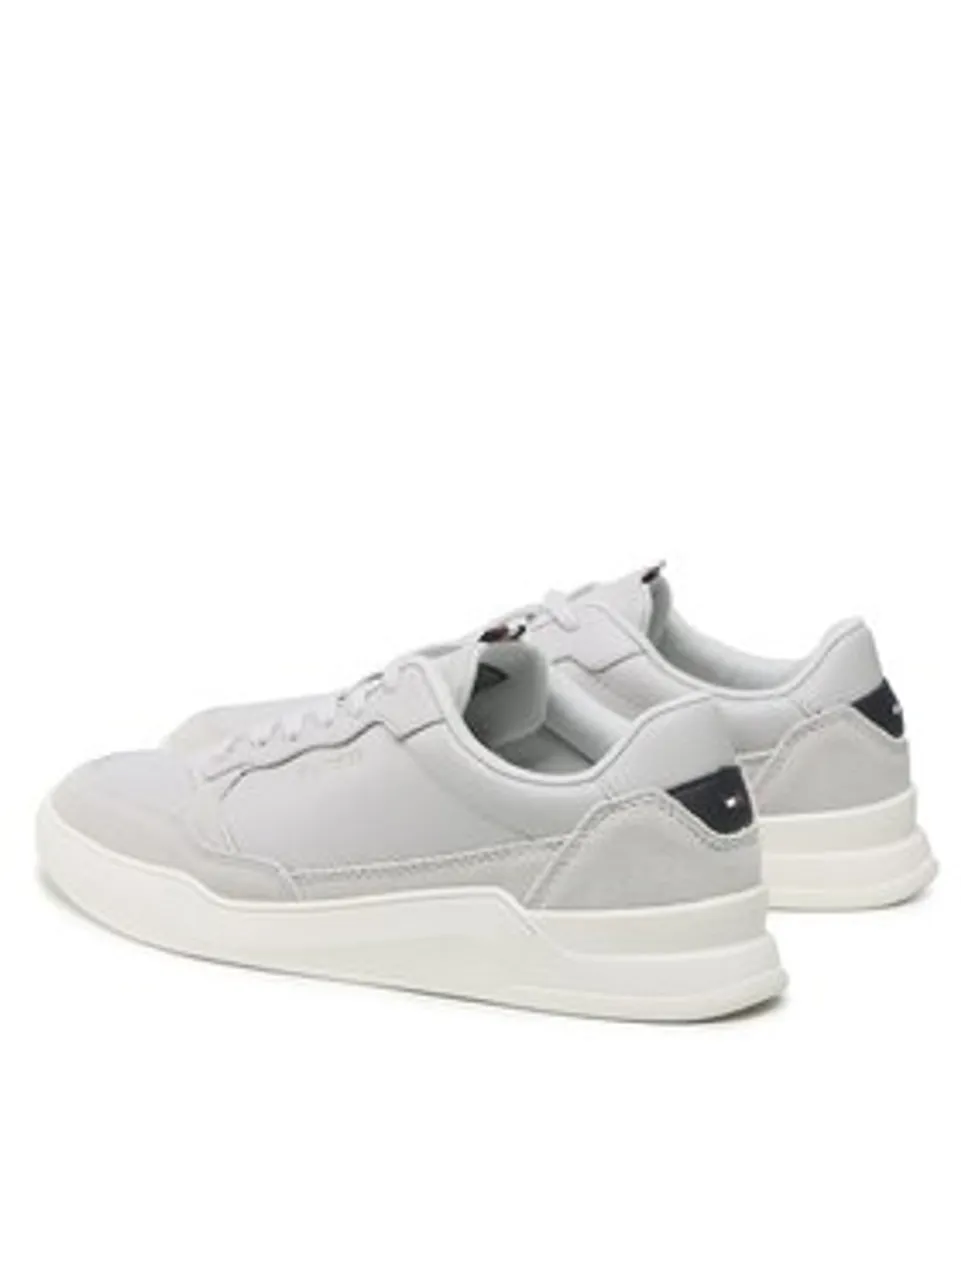 Tommy Hilfiger Sneakers Elevated Cupsole Leather Mix FM0FM04358 Grau